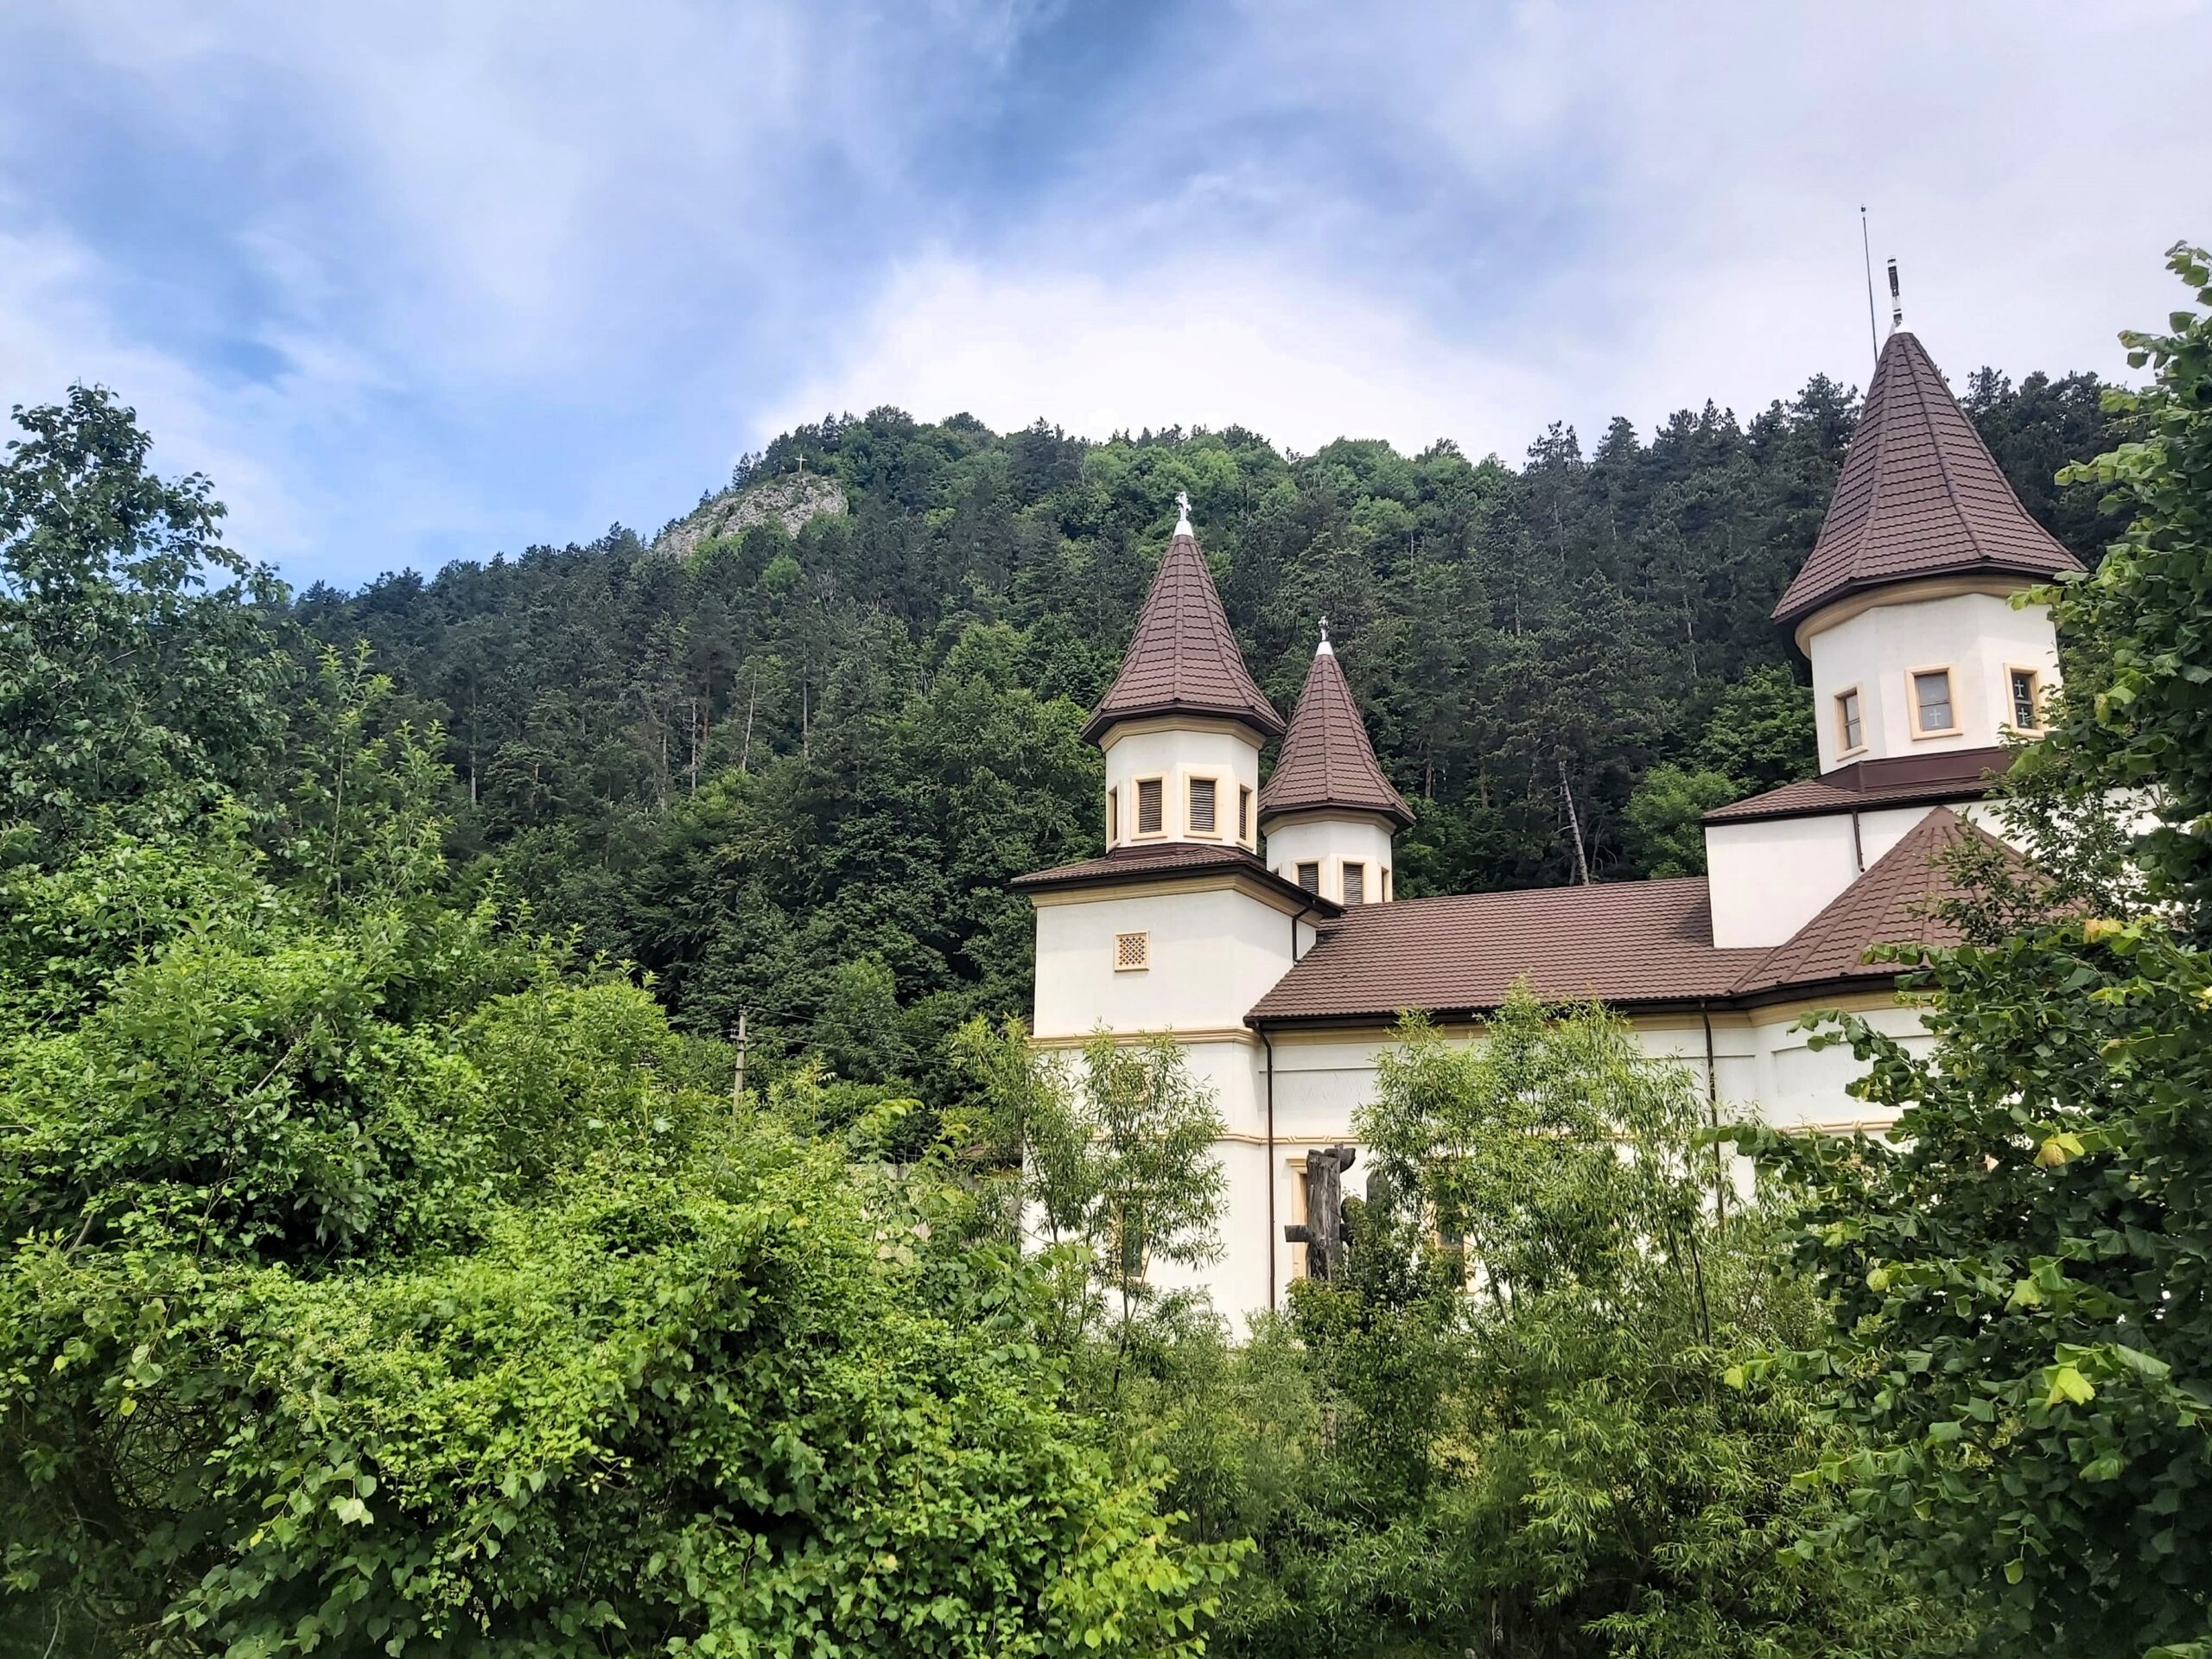 A white church poking out from behind green trees in Bran, Romania